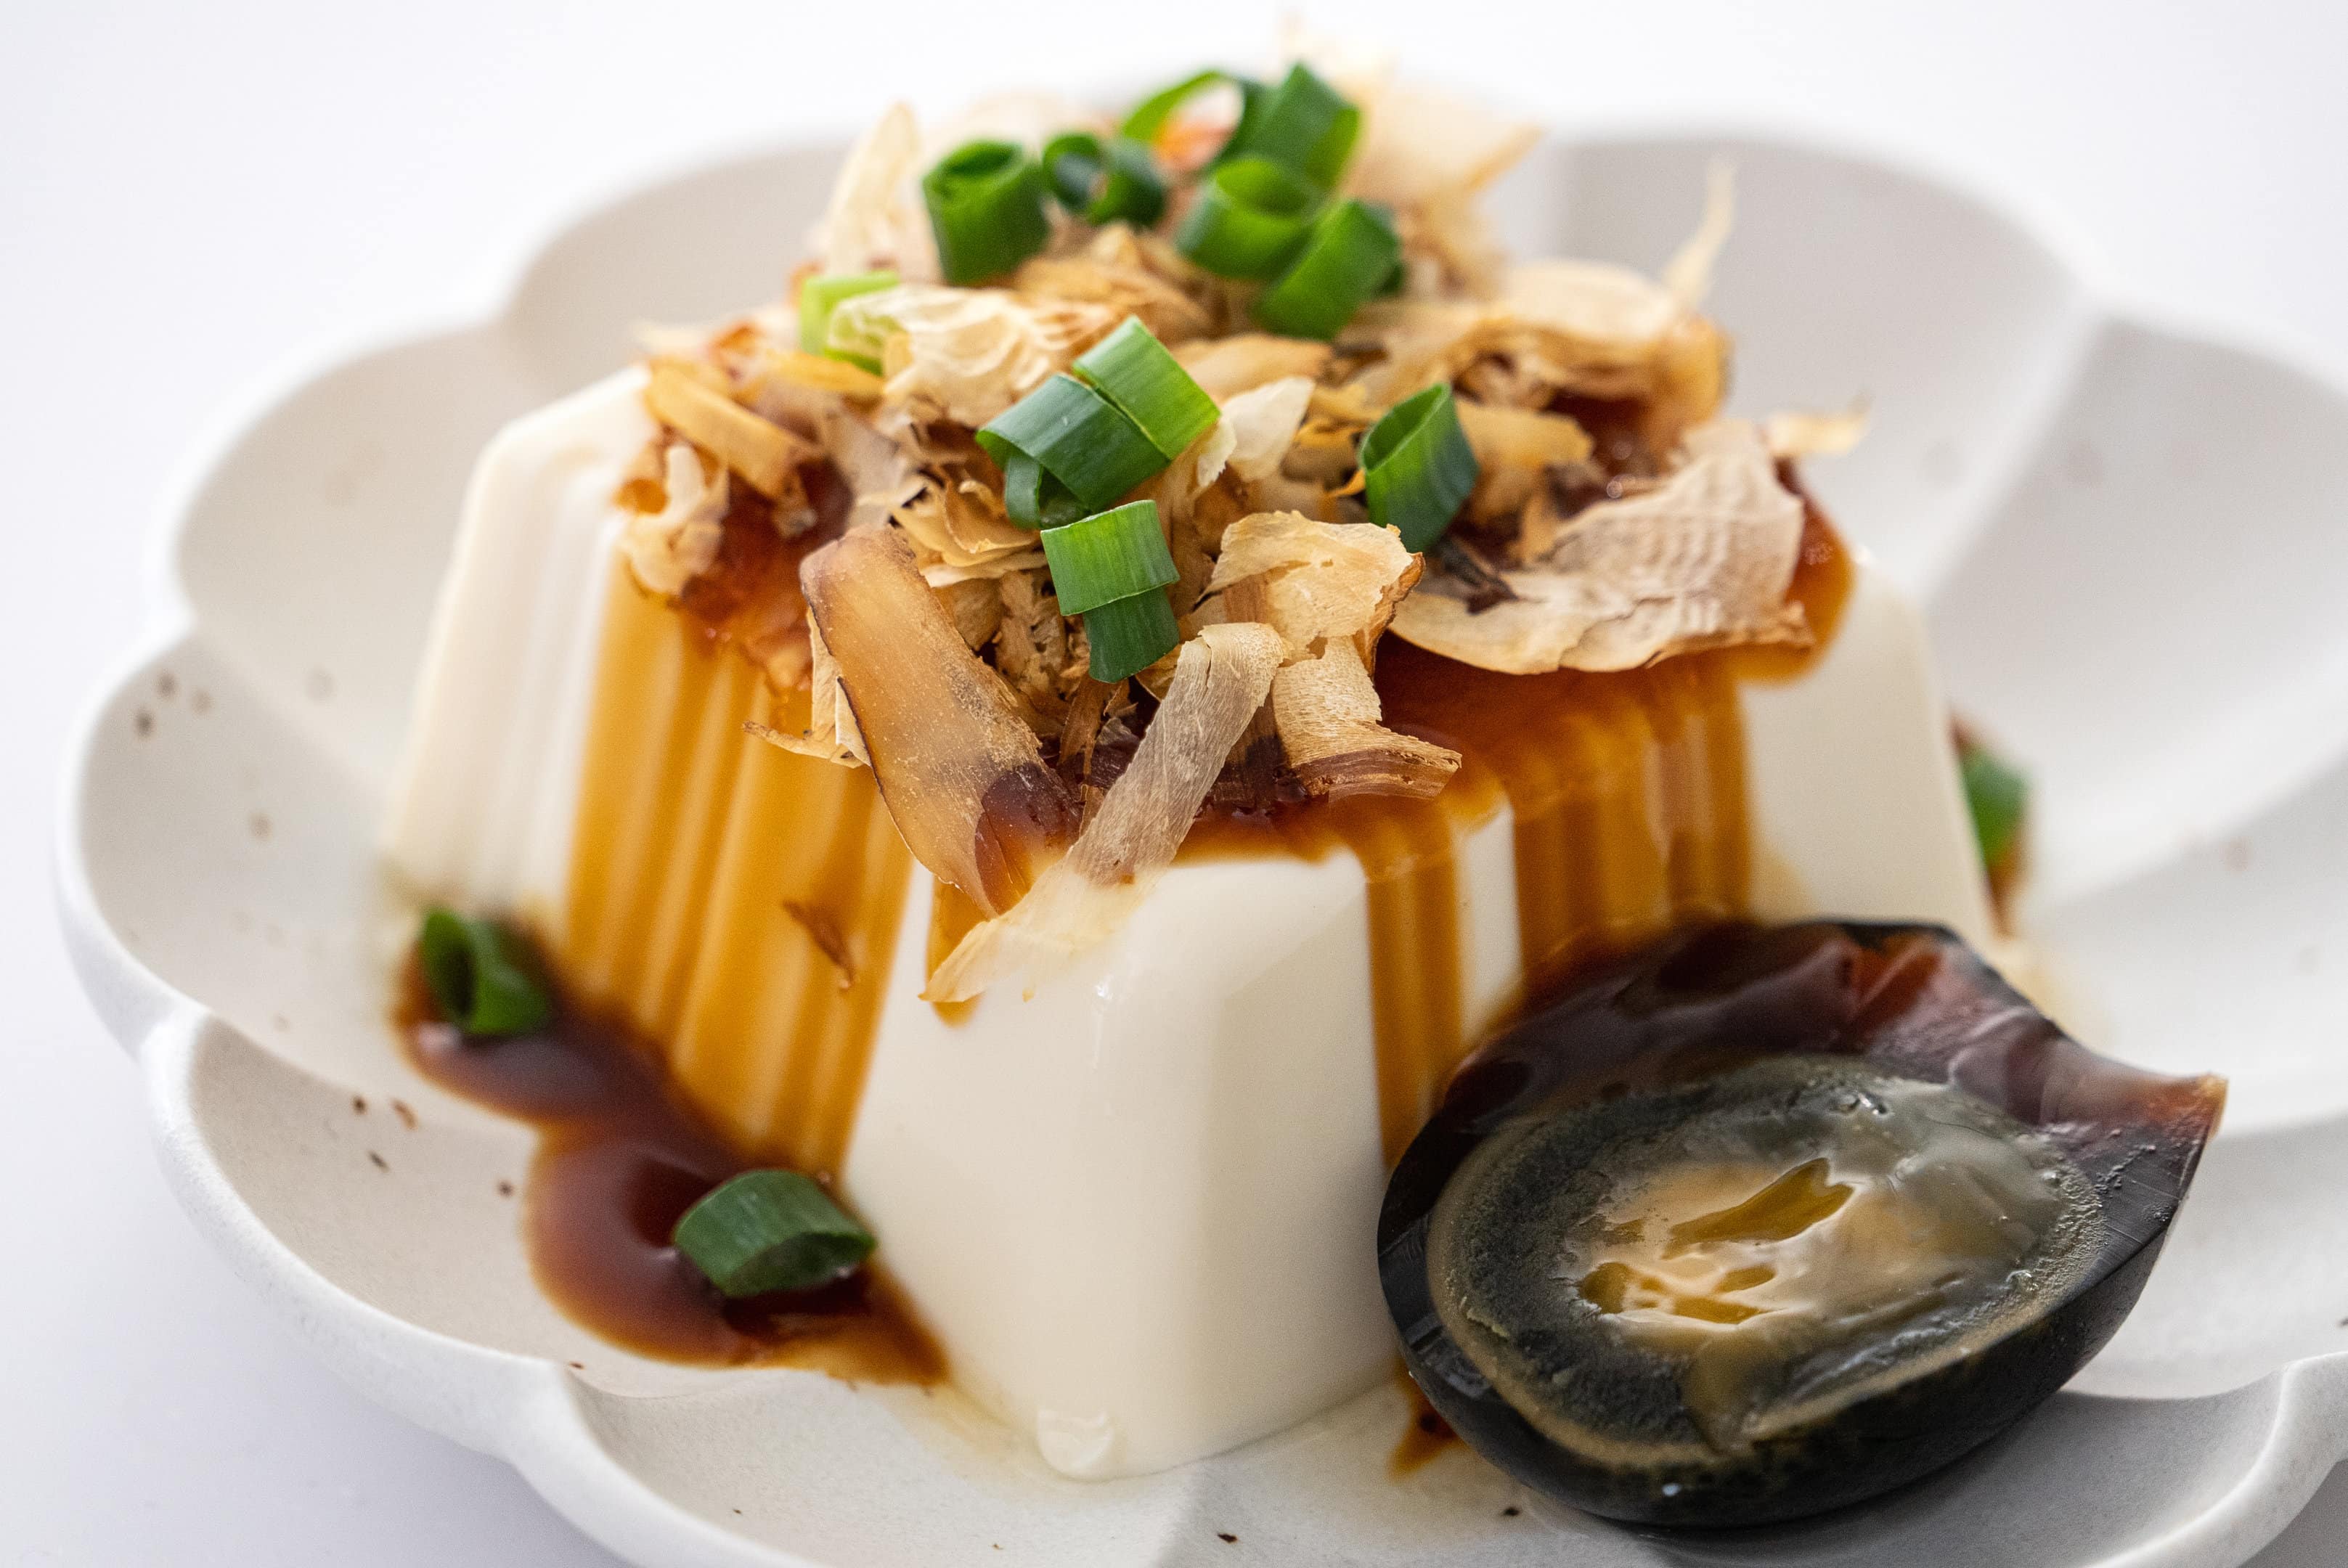 Silken tofu recipe with soy sauce and toppings